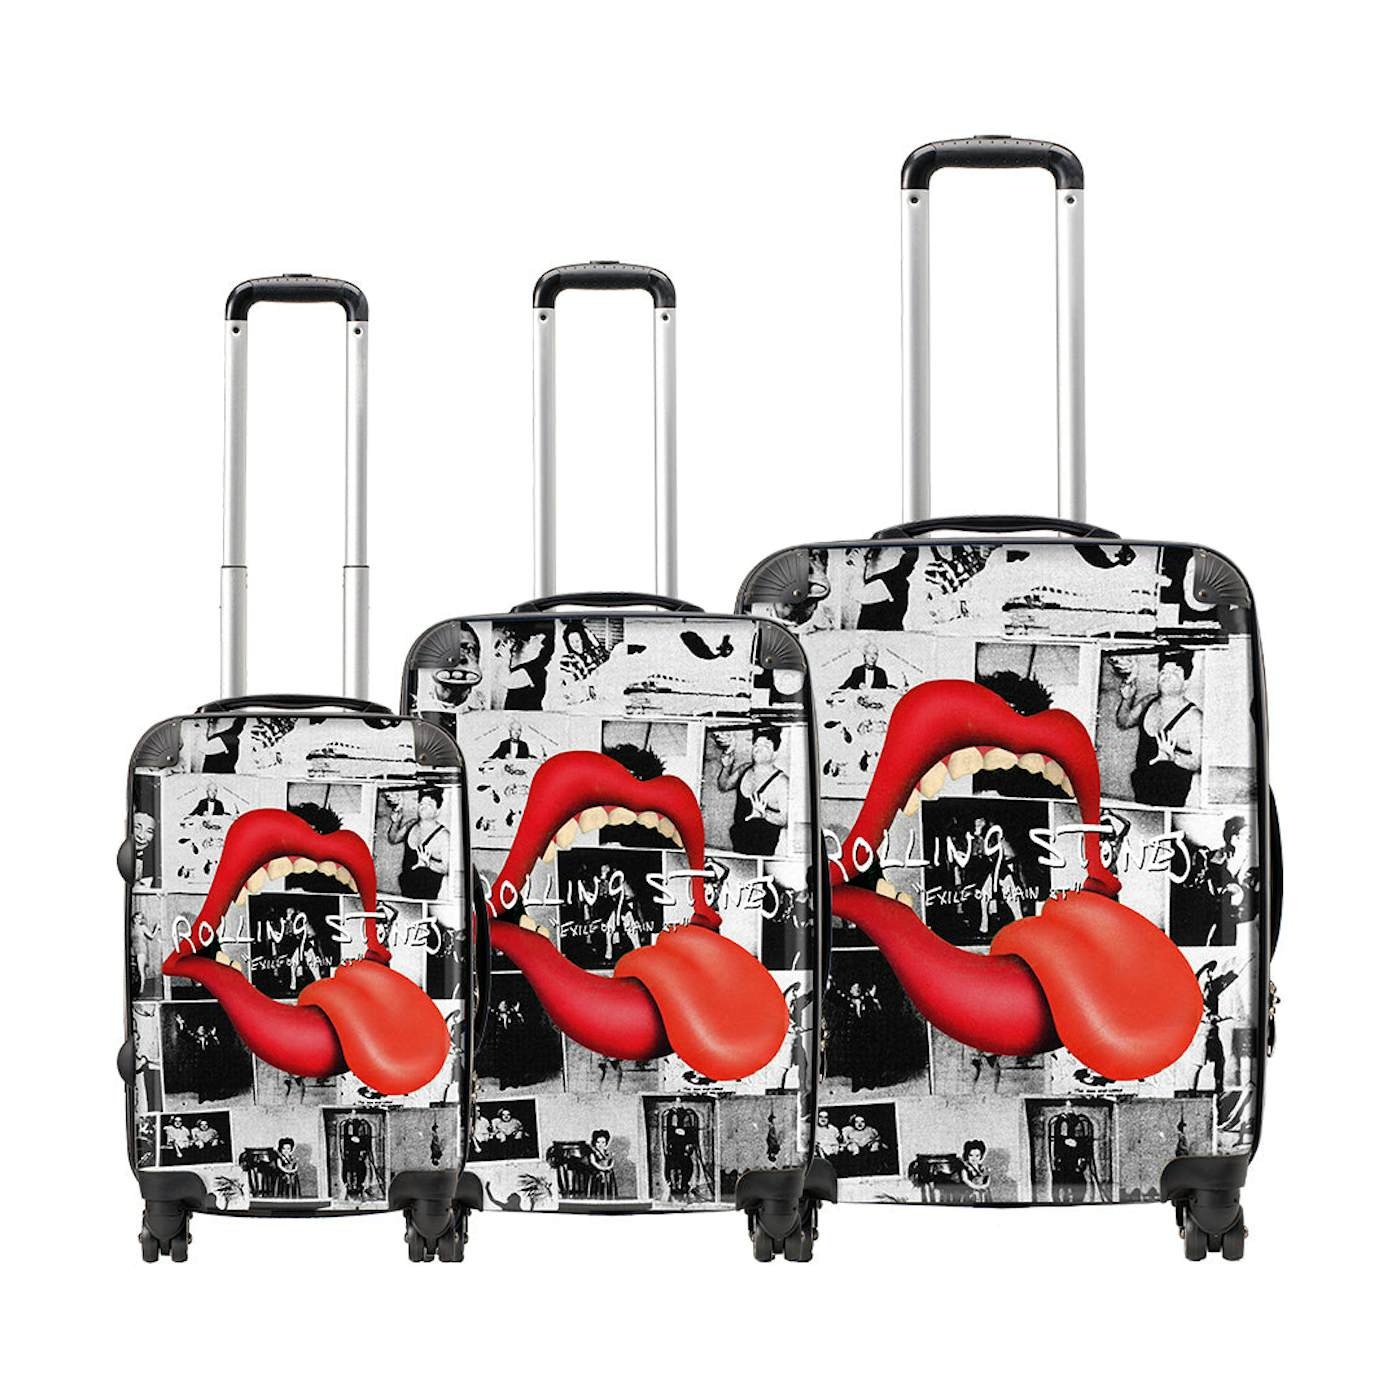 Rocksax The Rolling Stones Travel Bag Luggage - Exile